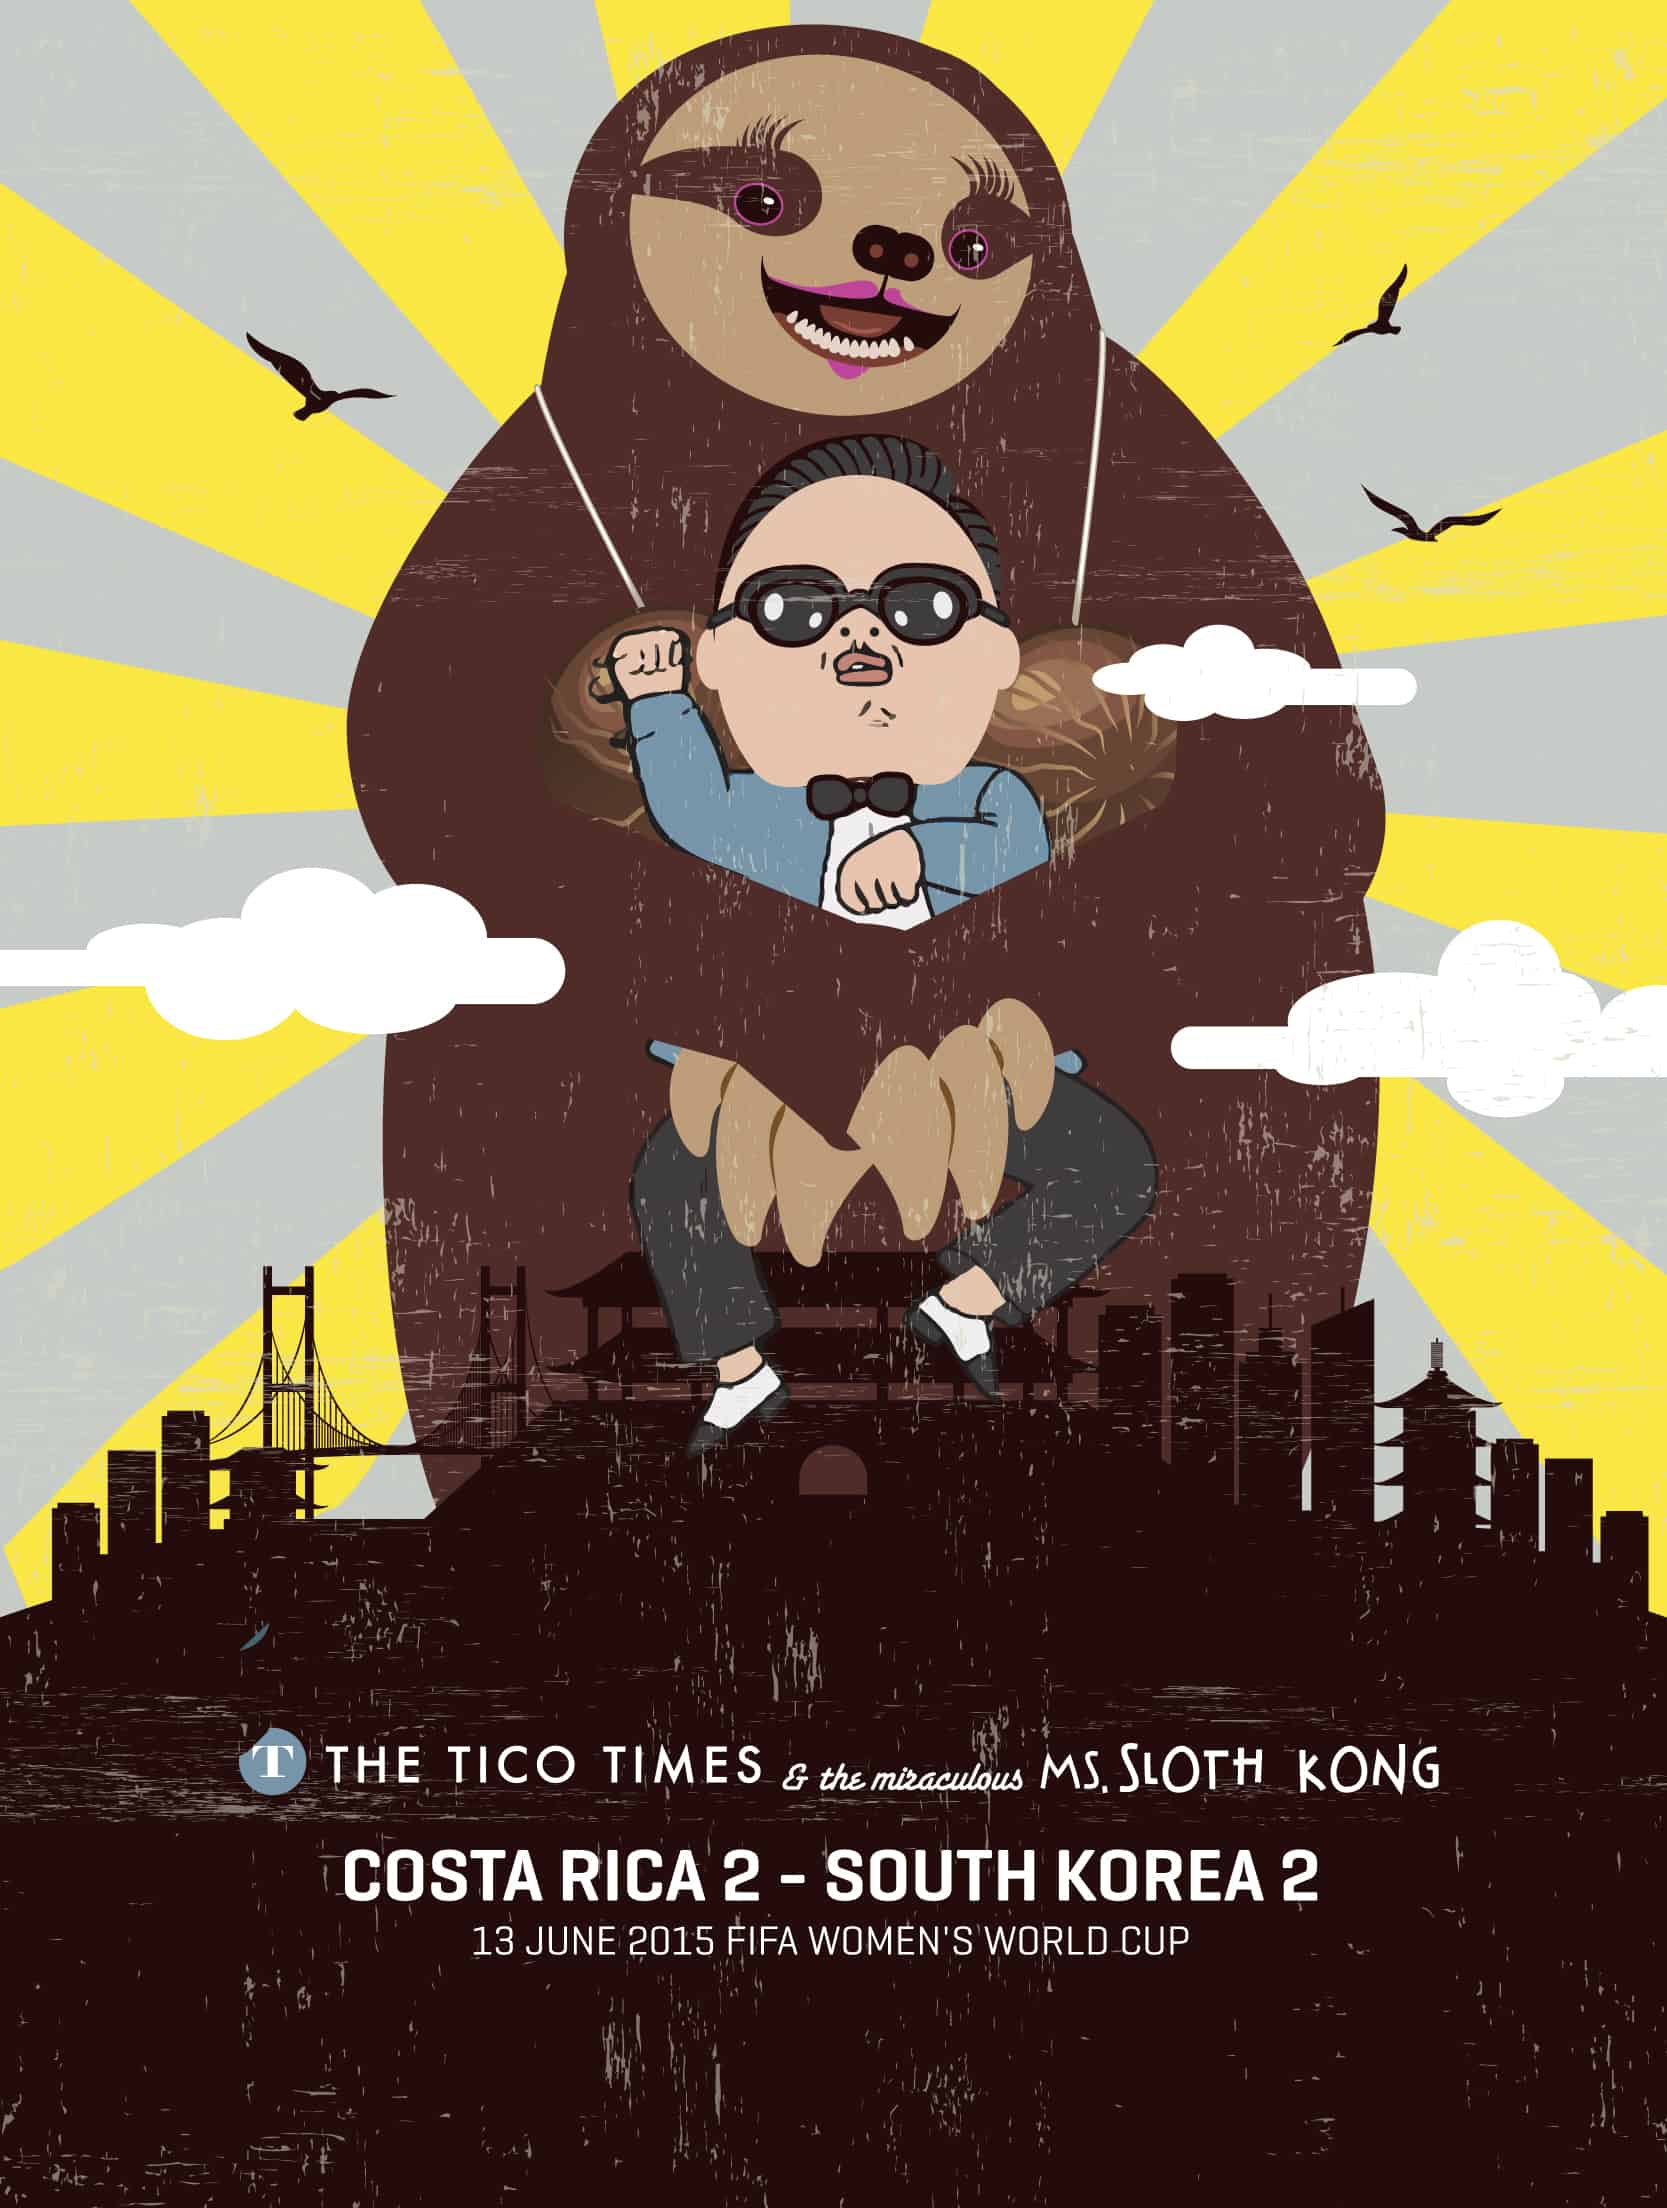 Ms. Sloth Kong allegedly seized the opportunity to sloth-hug Gangnam Style performer Psy.